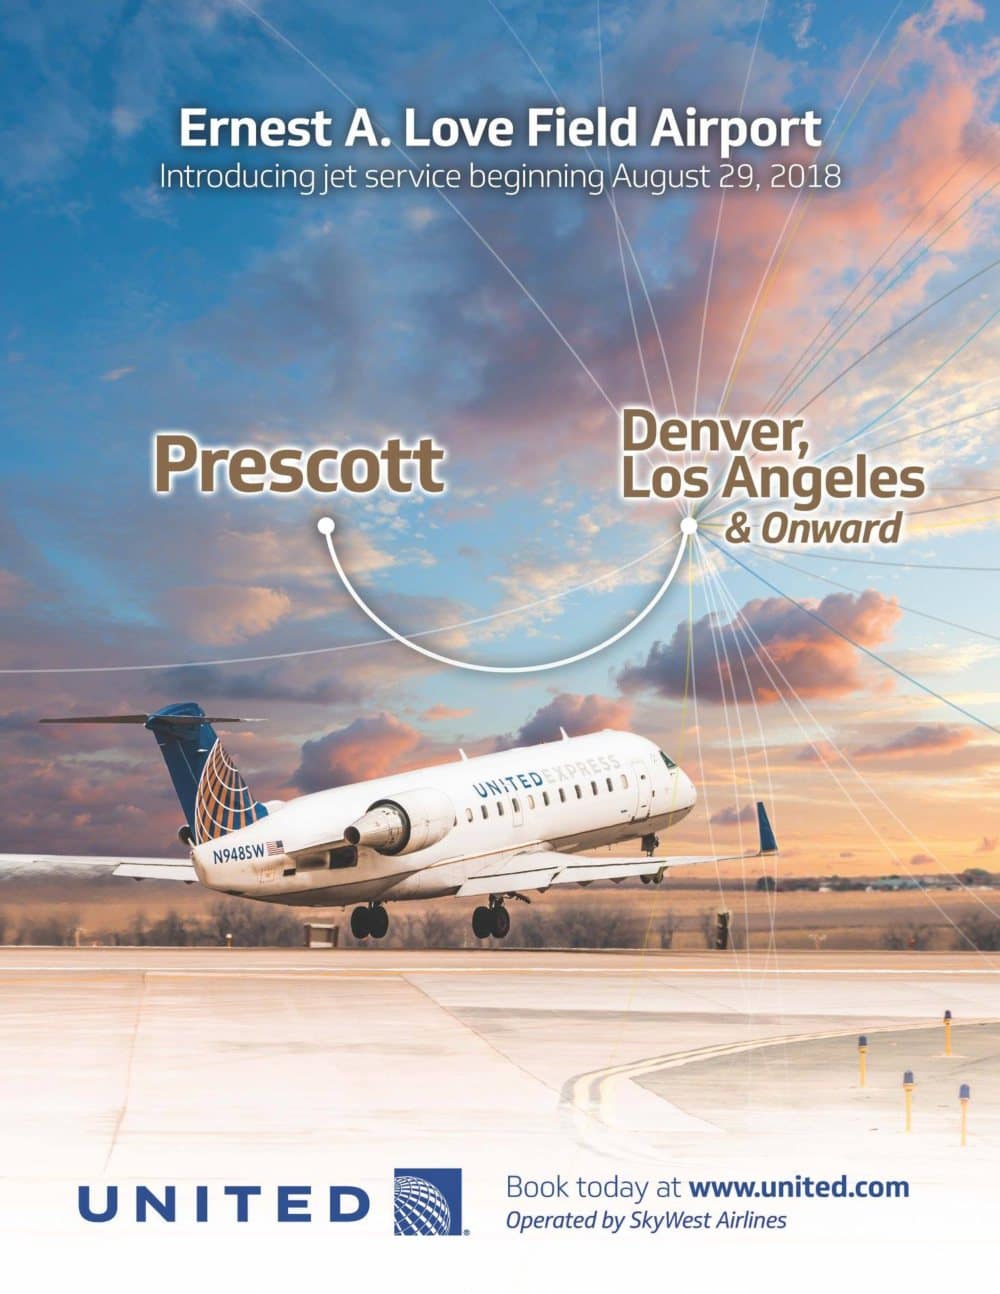 Ernest A Love Field Airport introduces jet service beginning August 29, 2018 connecting Prescott to Denver and Los Angeles with flights provided by United Airlines